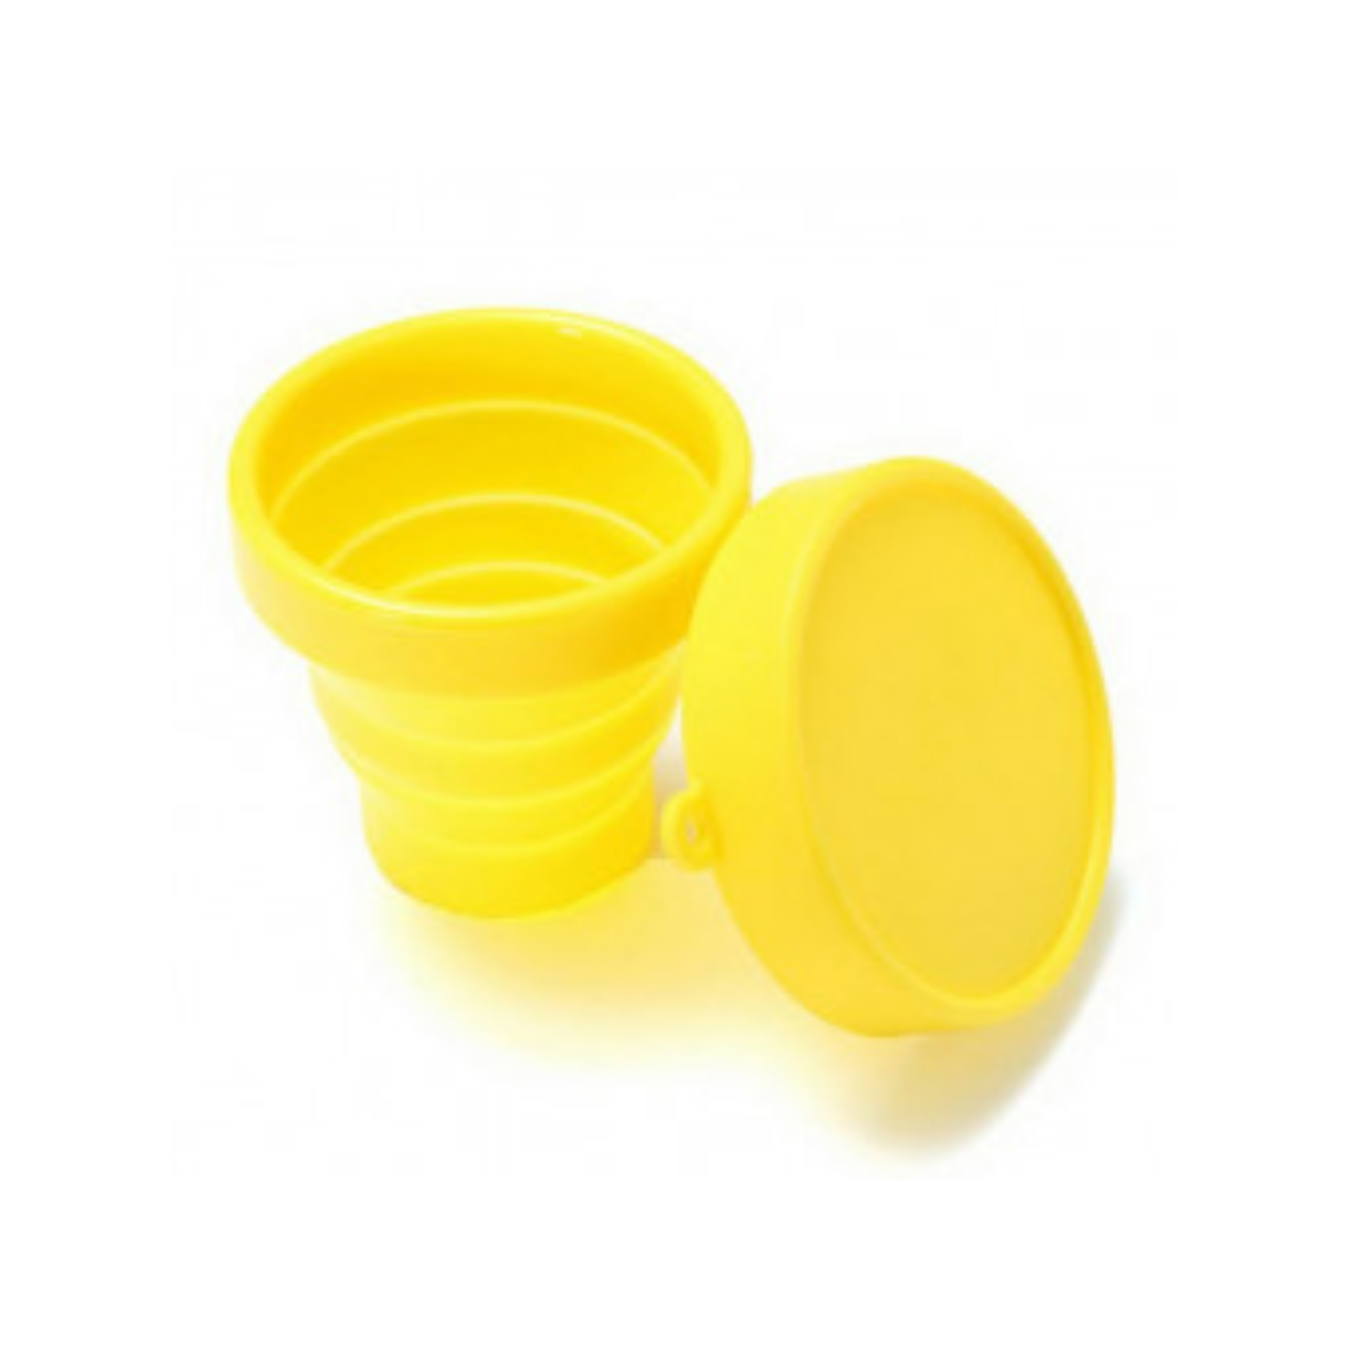 Outdoor Collapsible Silicone Cup